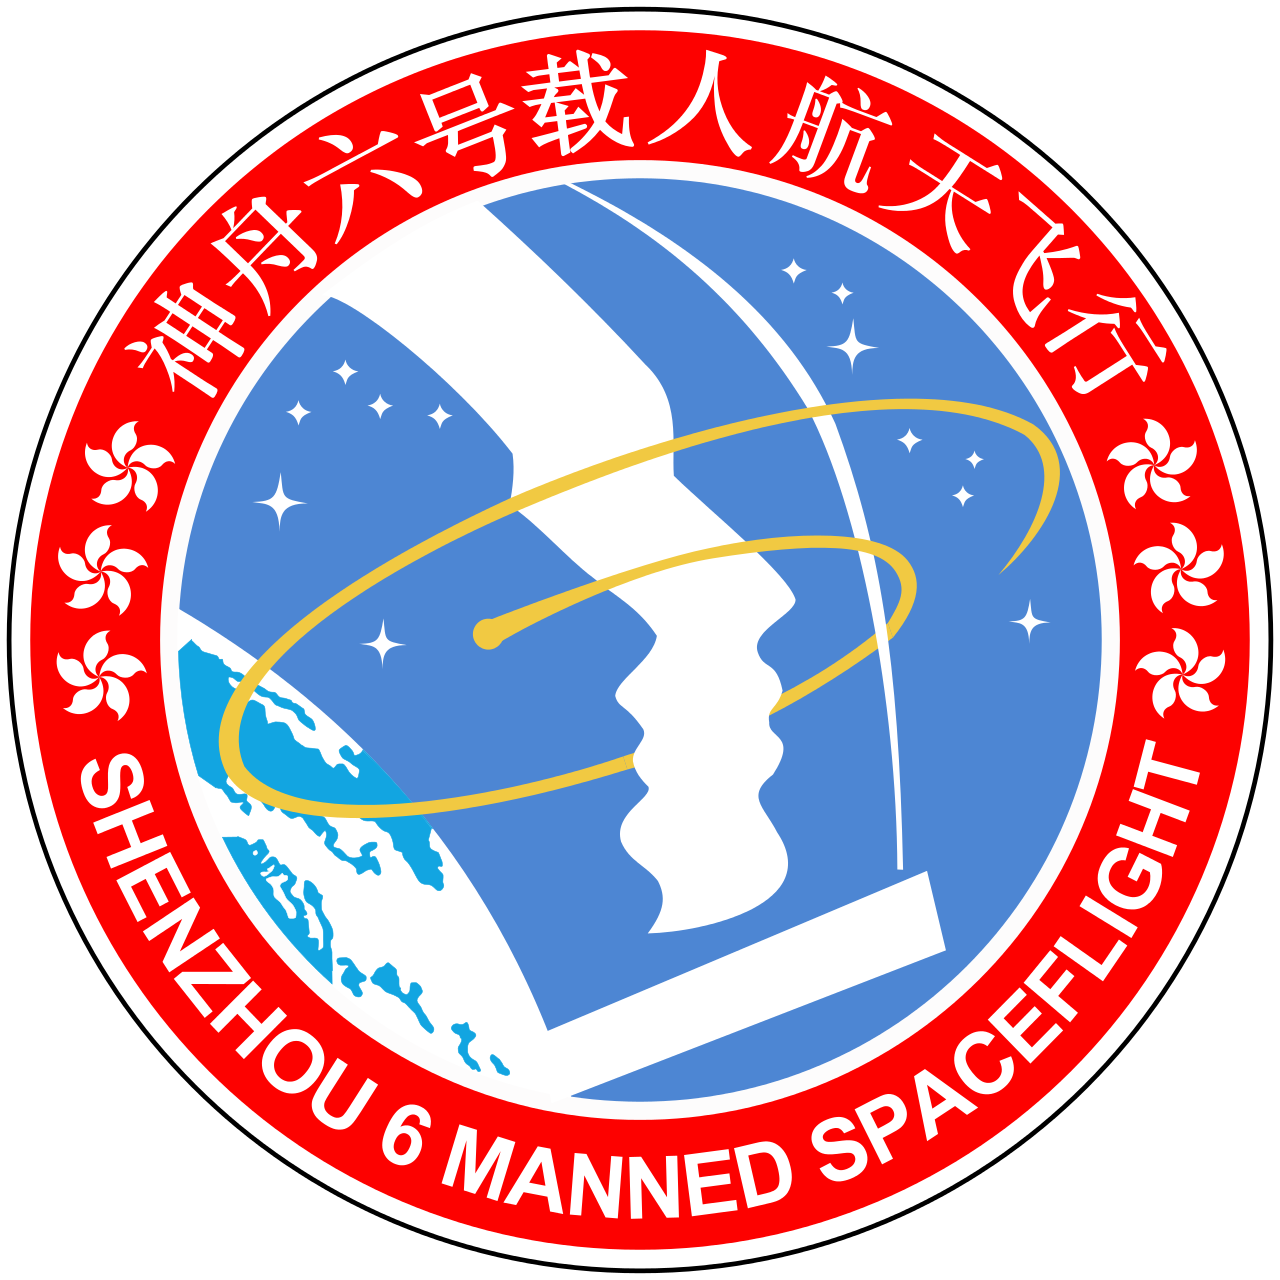 Mission patch for Shenzhou-6